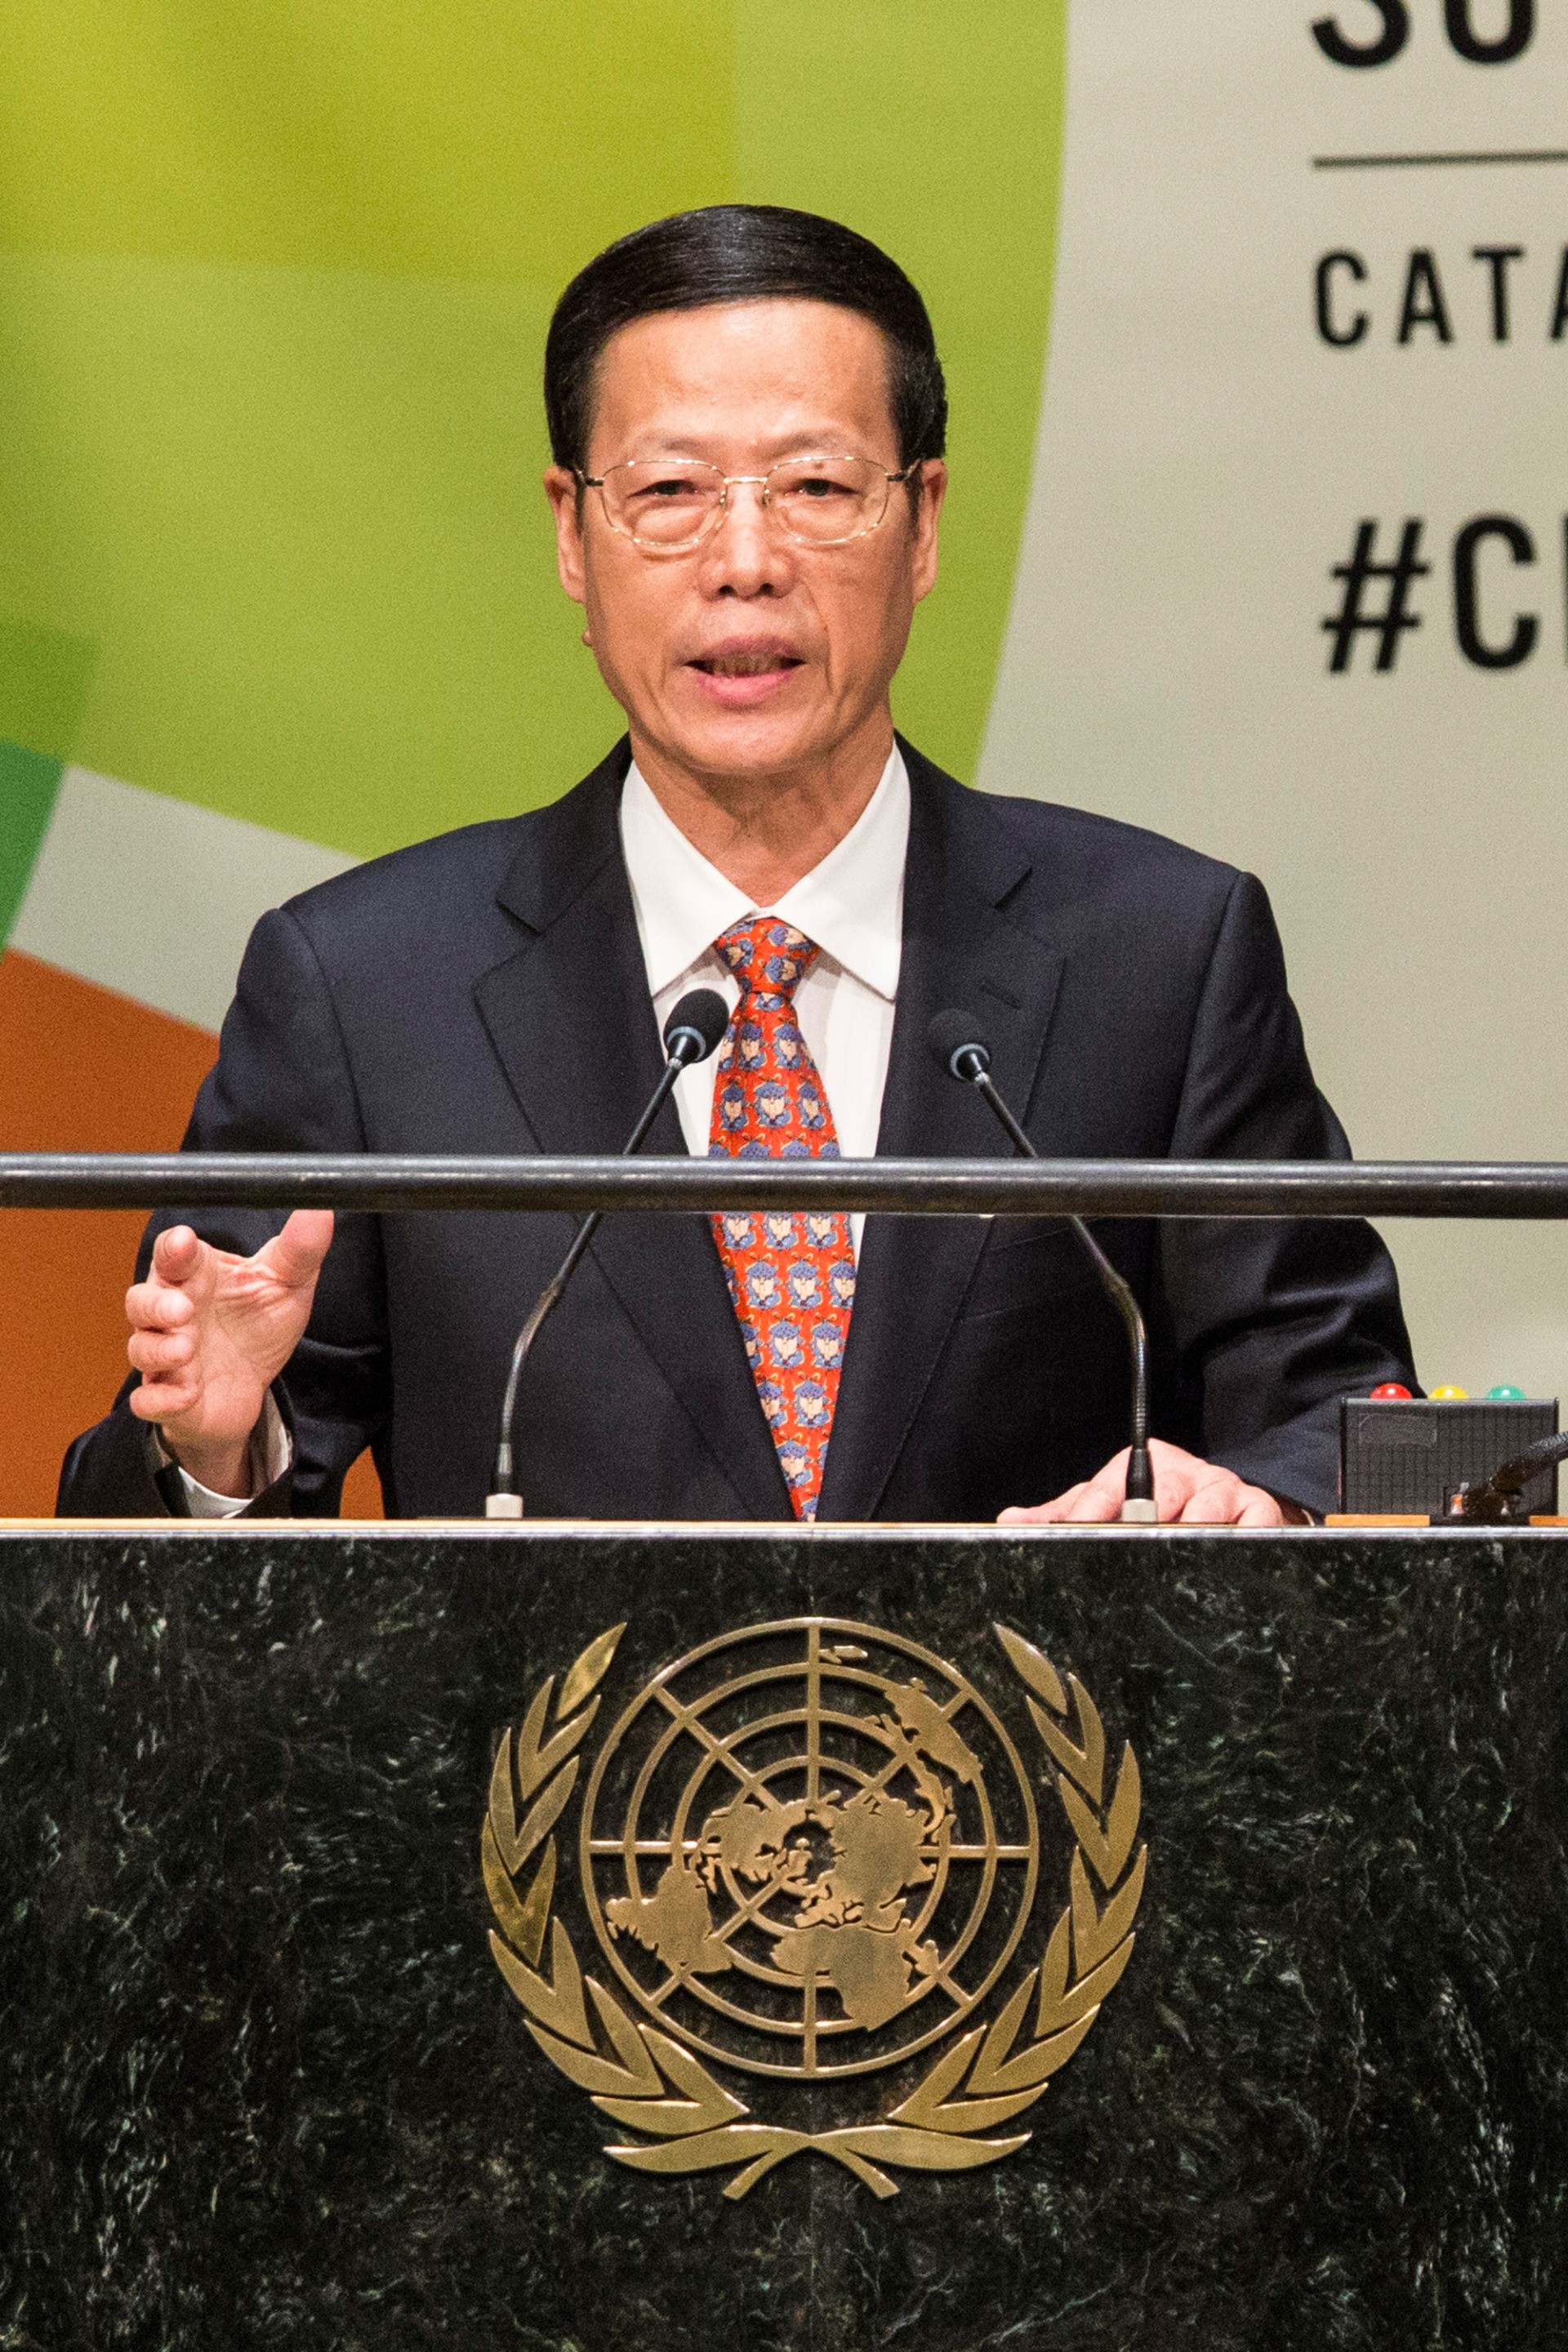 Chinese Vice Premier Zhang Gaoli speaks at the United Nations Climate Summit on September 23, 2014 in New York City. The summit, which is meeting one day before the UN General Assembly begins, is bringing together world leaders, scientists and activists looking to curb climate change. (Photo by Andrew Burton/Getty Images)